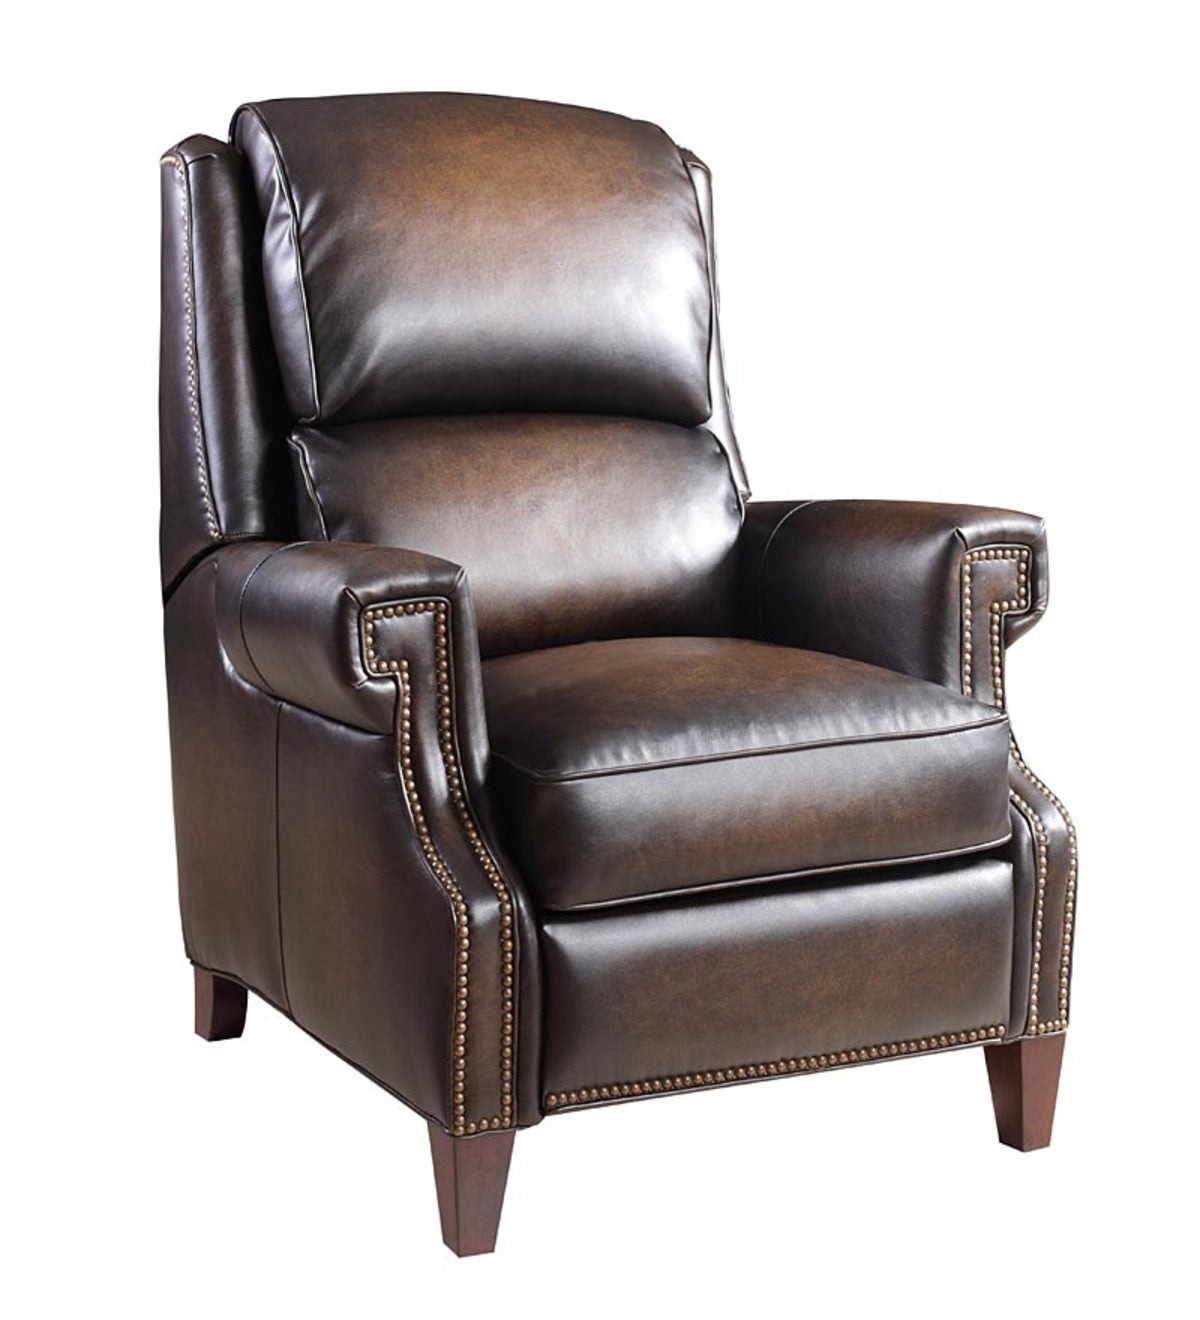 Franklin brown leather recliner with nail head trim